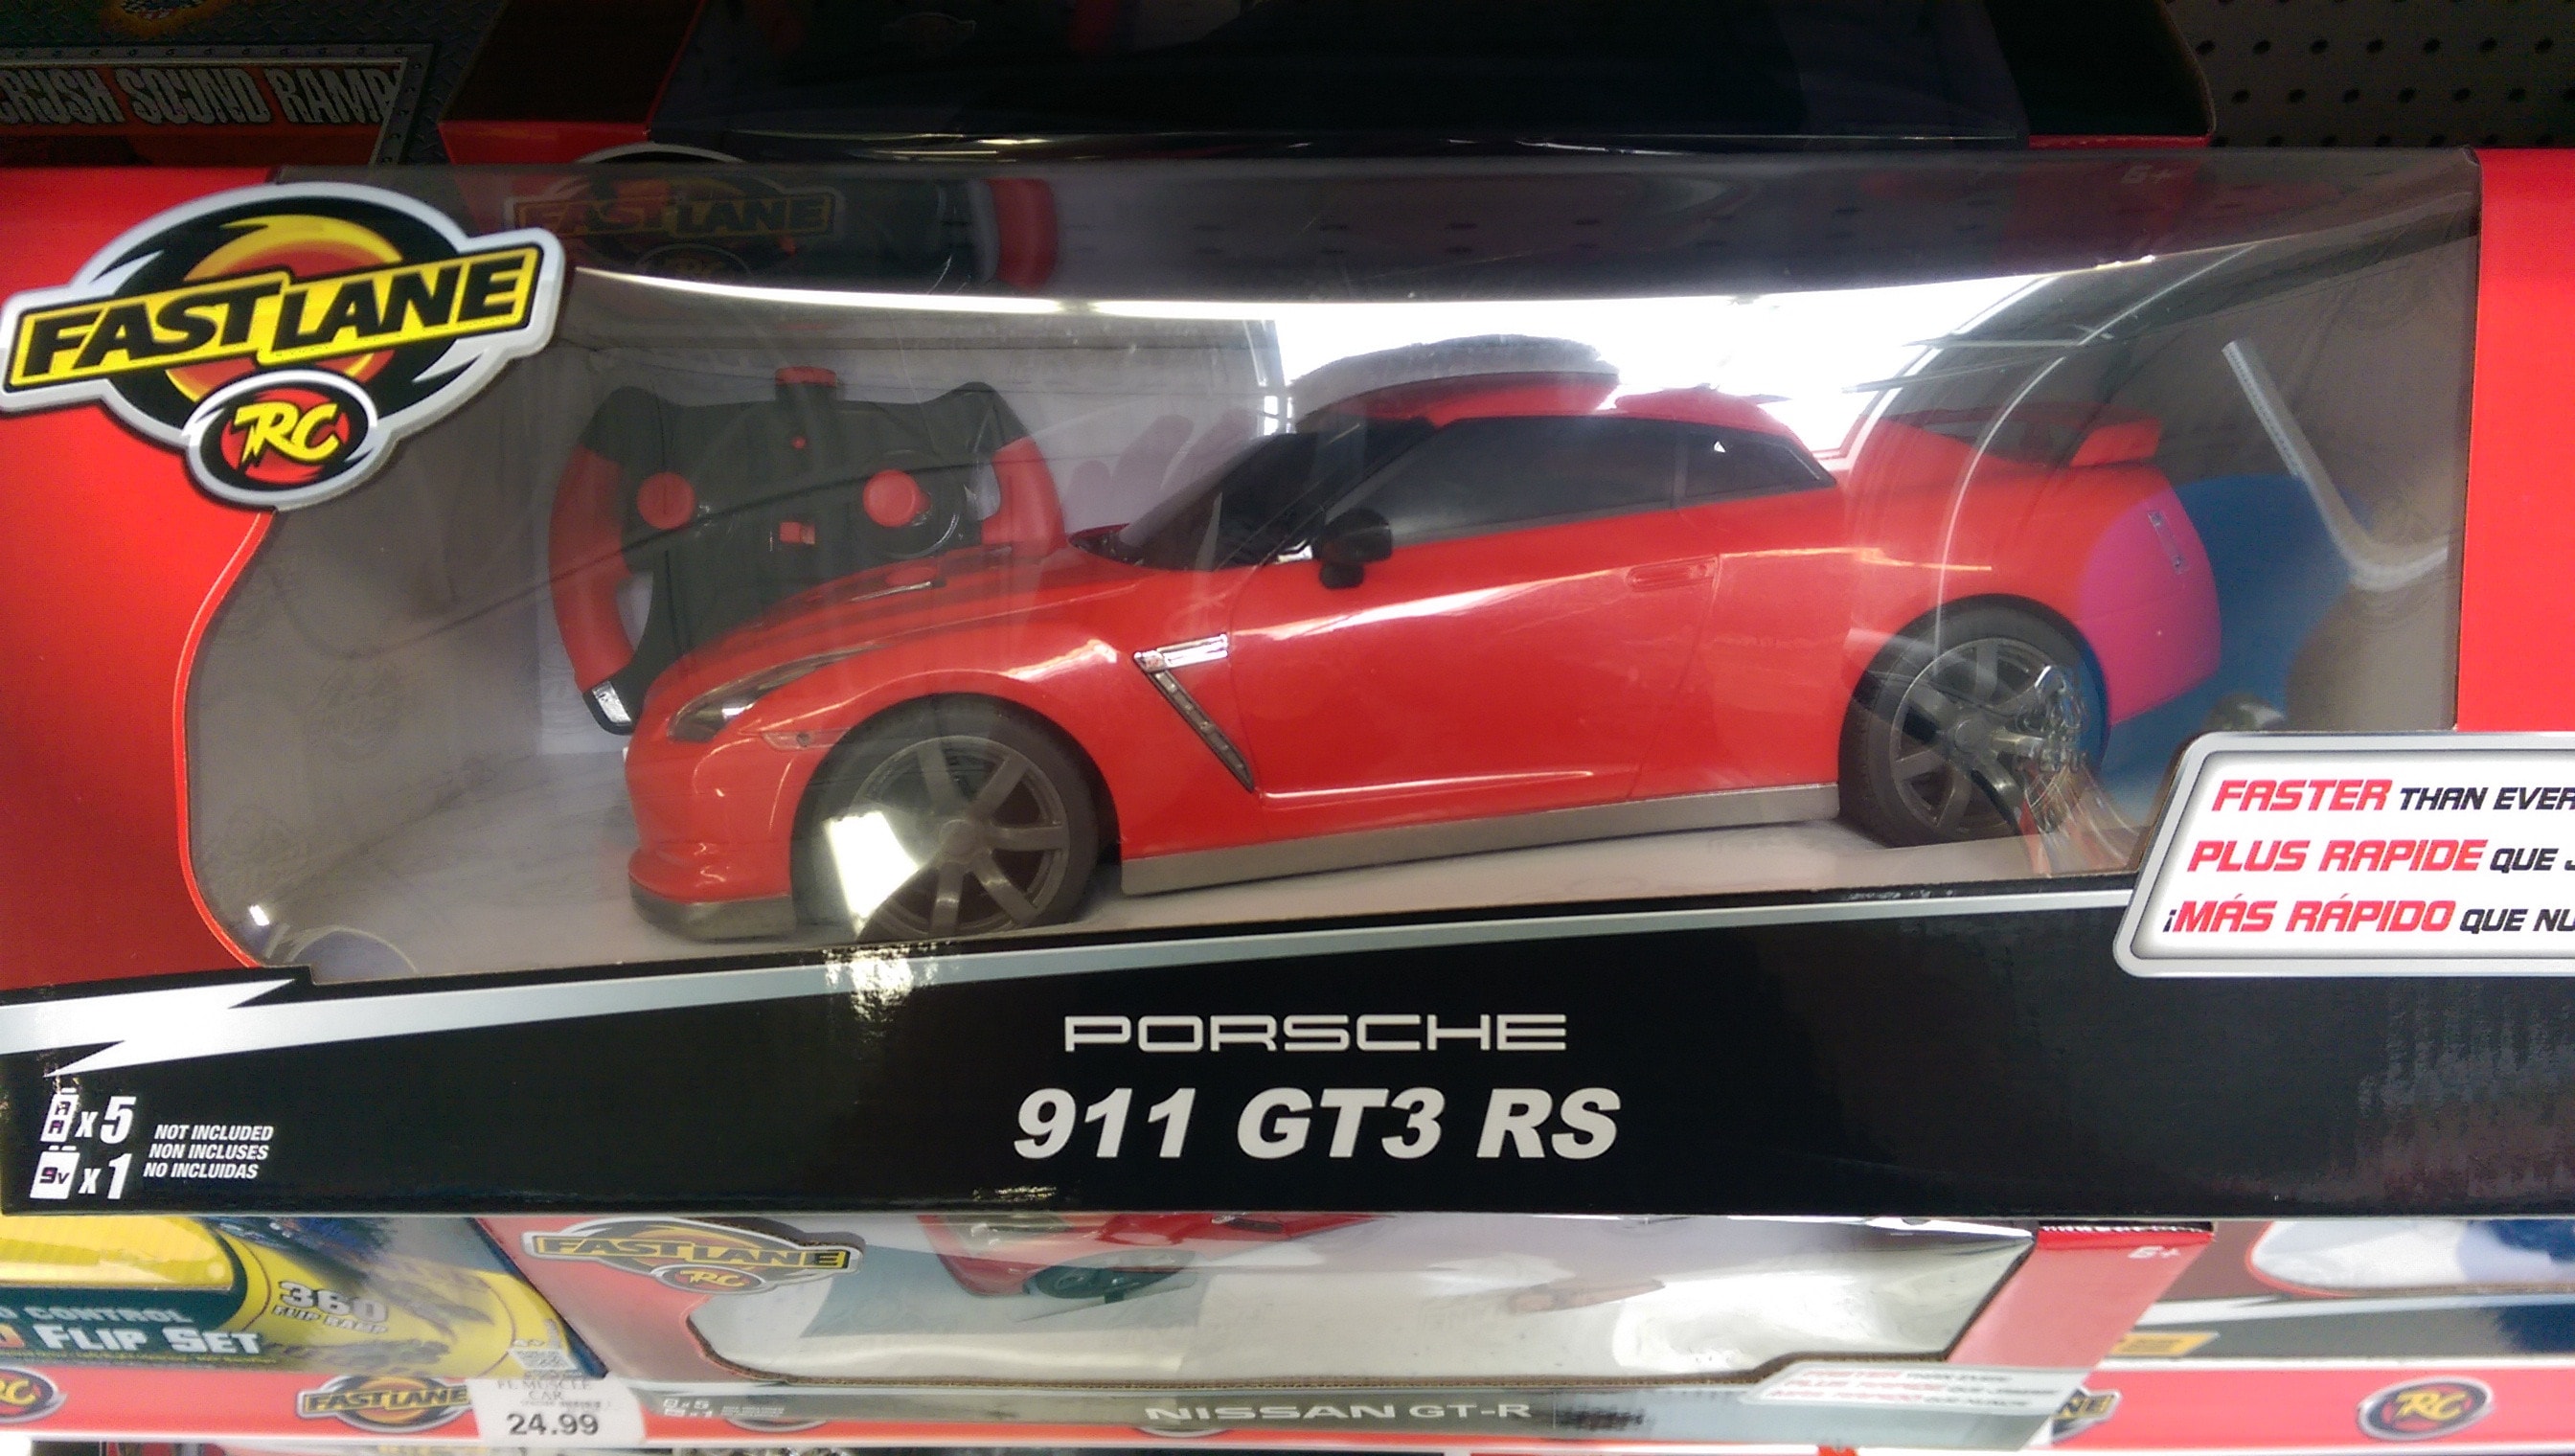 Nissan Gt R Rc Car Packed In Porsche 911 Gt3 Rs Box Is A Humiliating Mistake Autoevolution